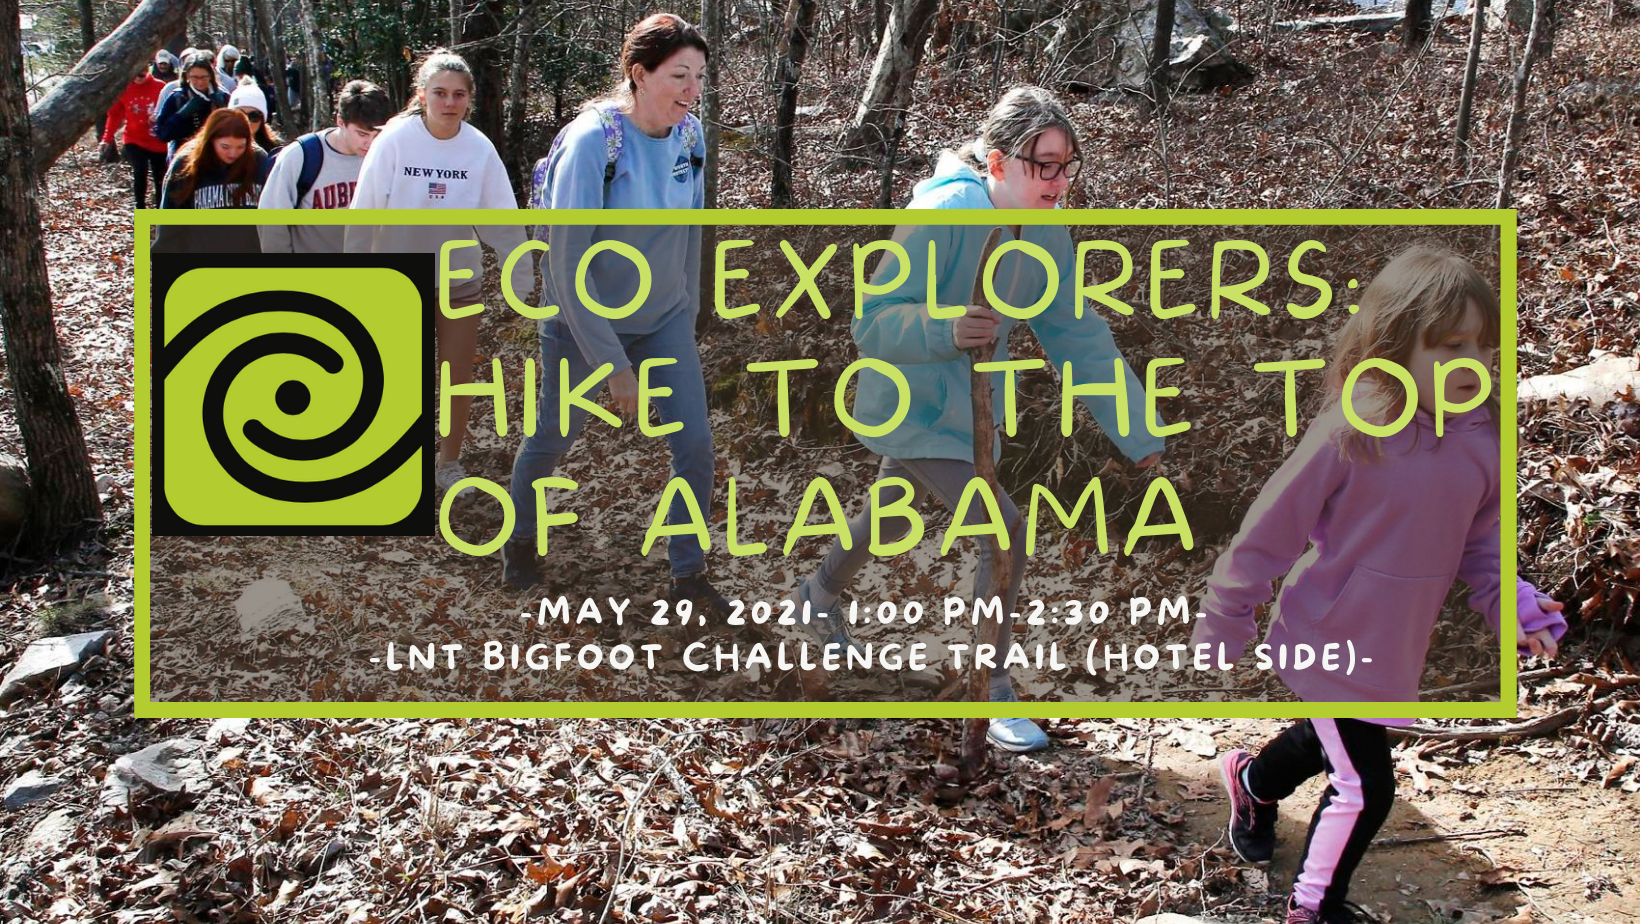 Eco Explorers: Leave No Trace Hike to the Top of Alabama